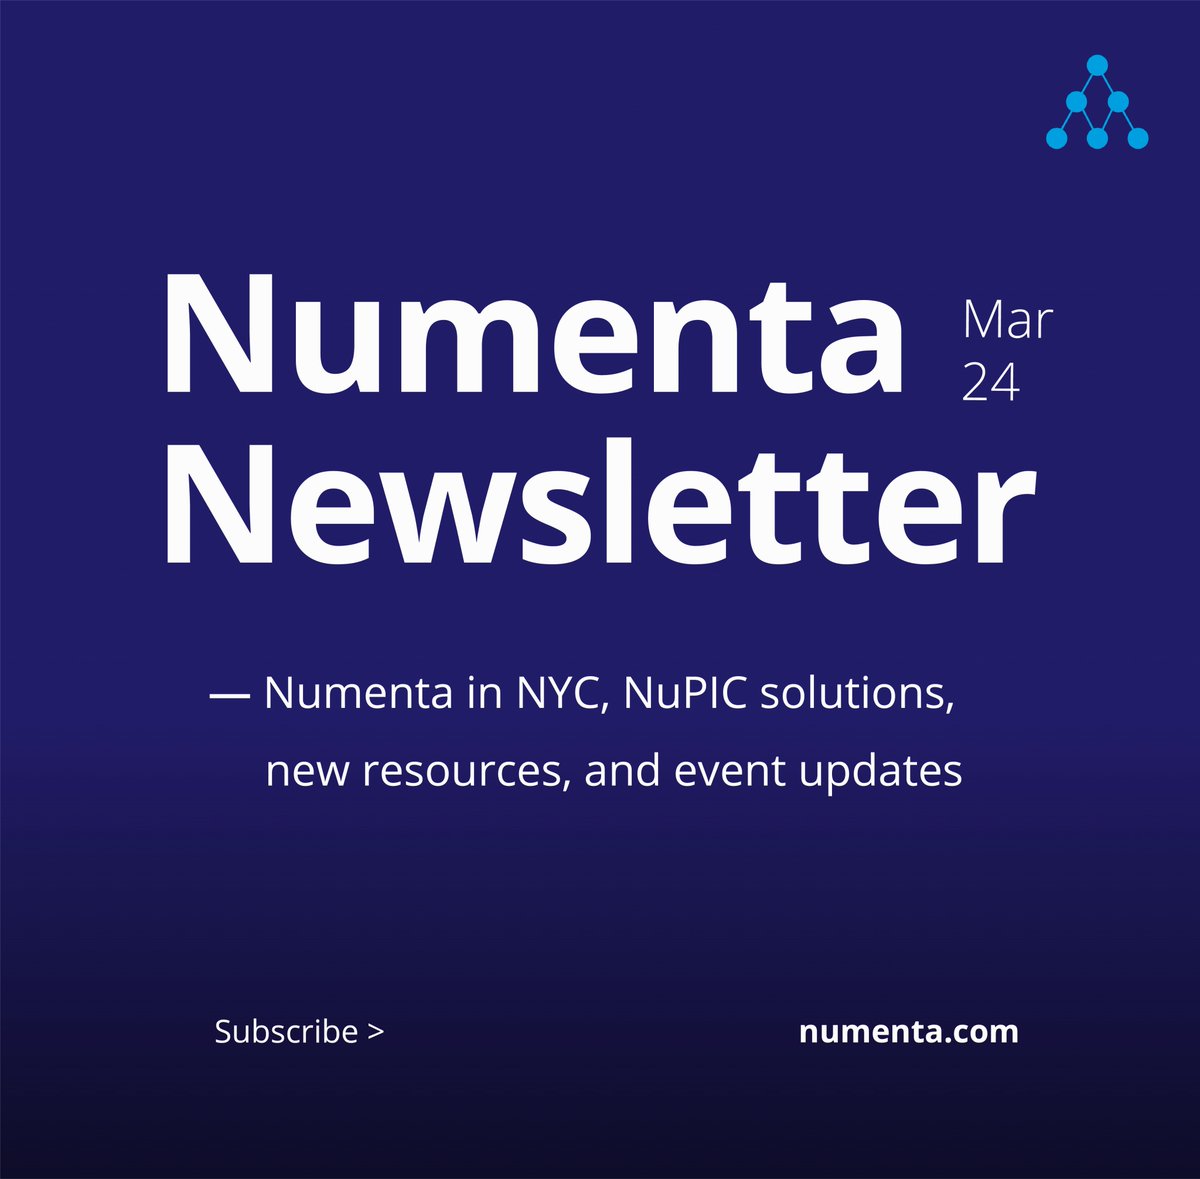 Check out our latest newsletter to learn more about Numenta in NYC this week, our new AI-based solutions, and more.

Read here: numenta.com/company/newsle…